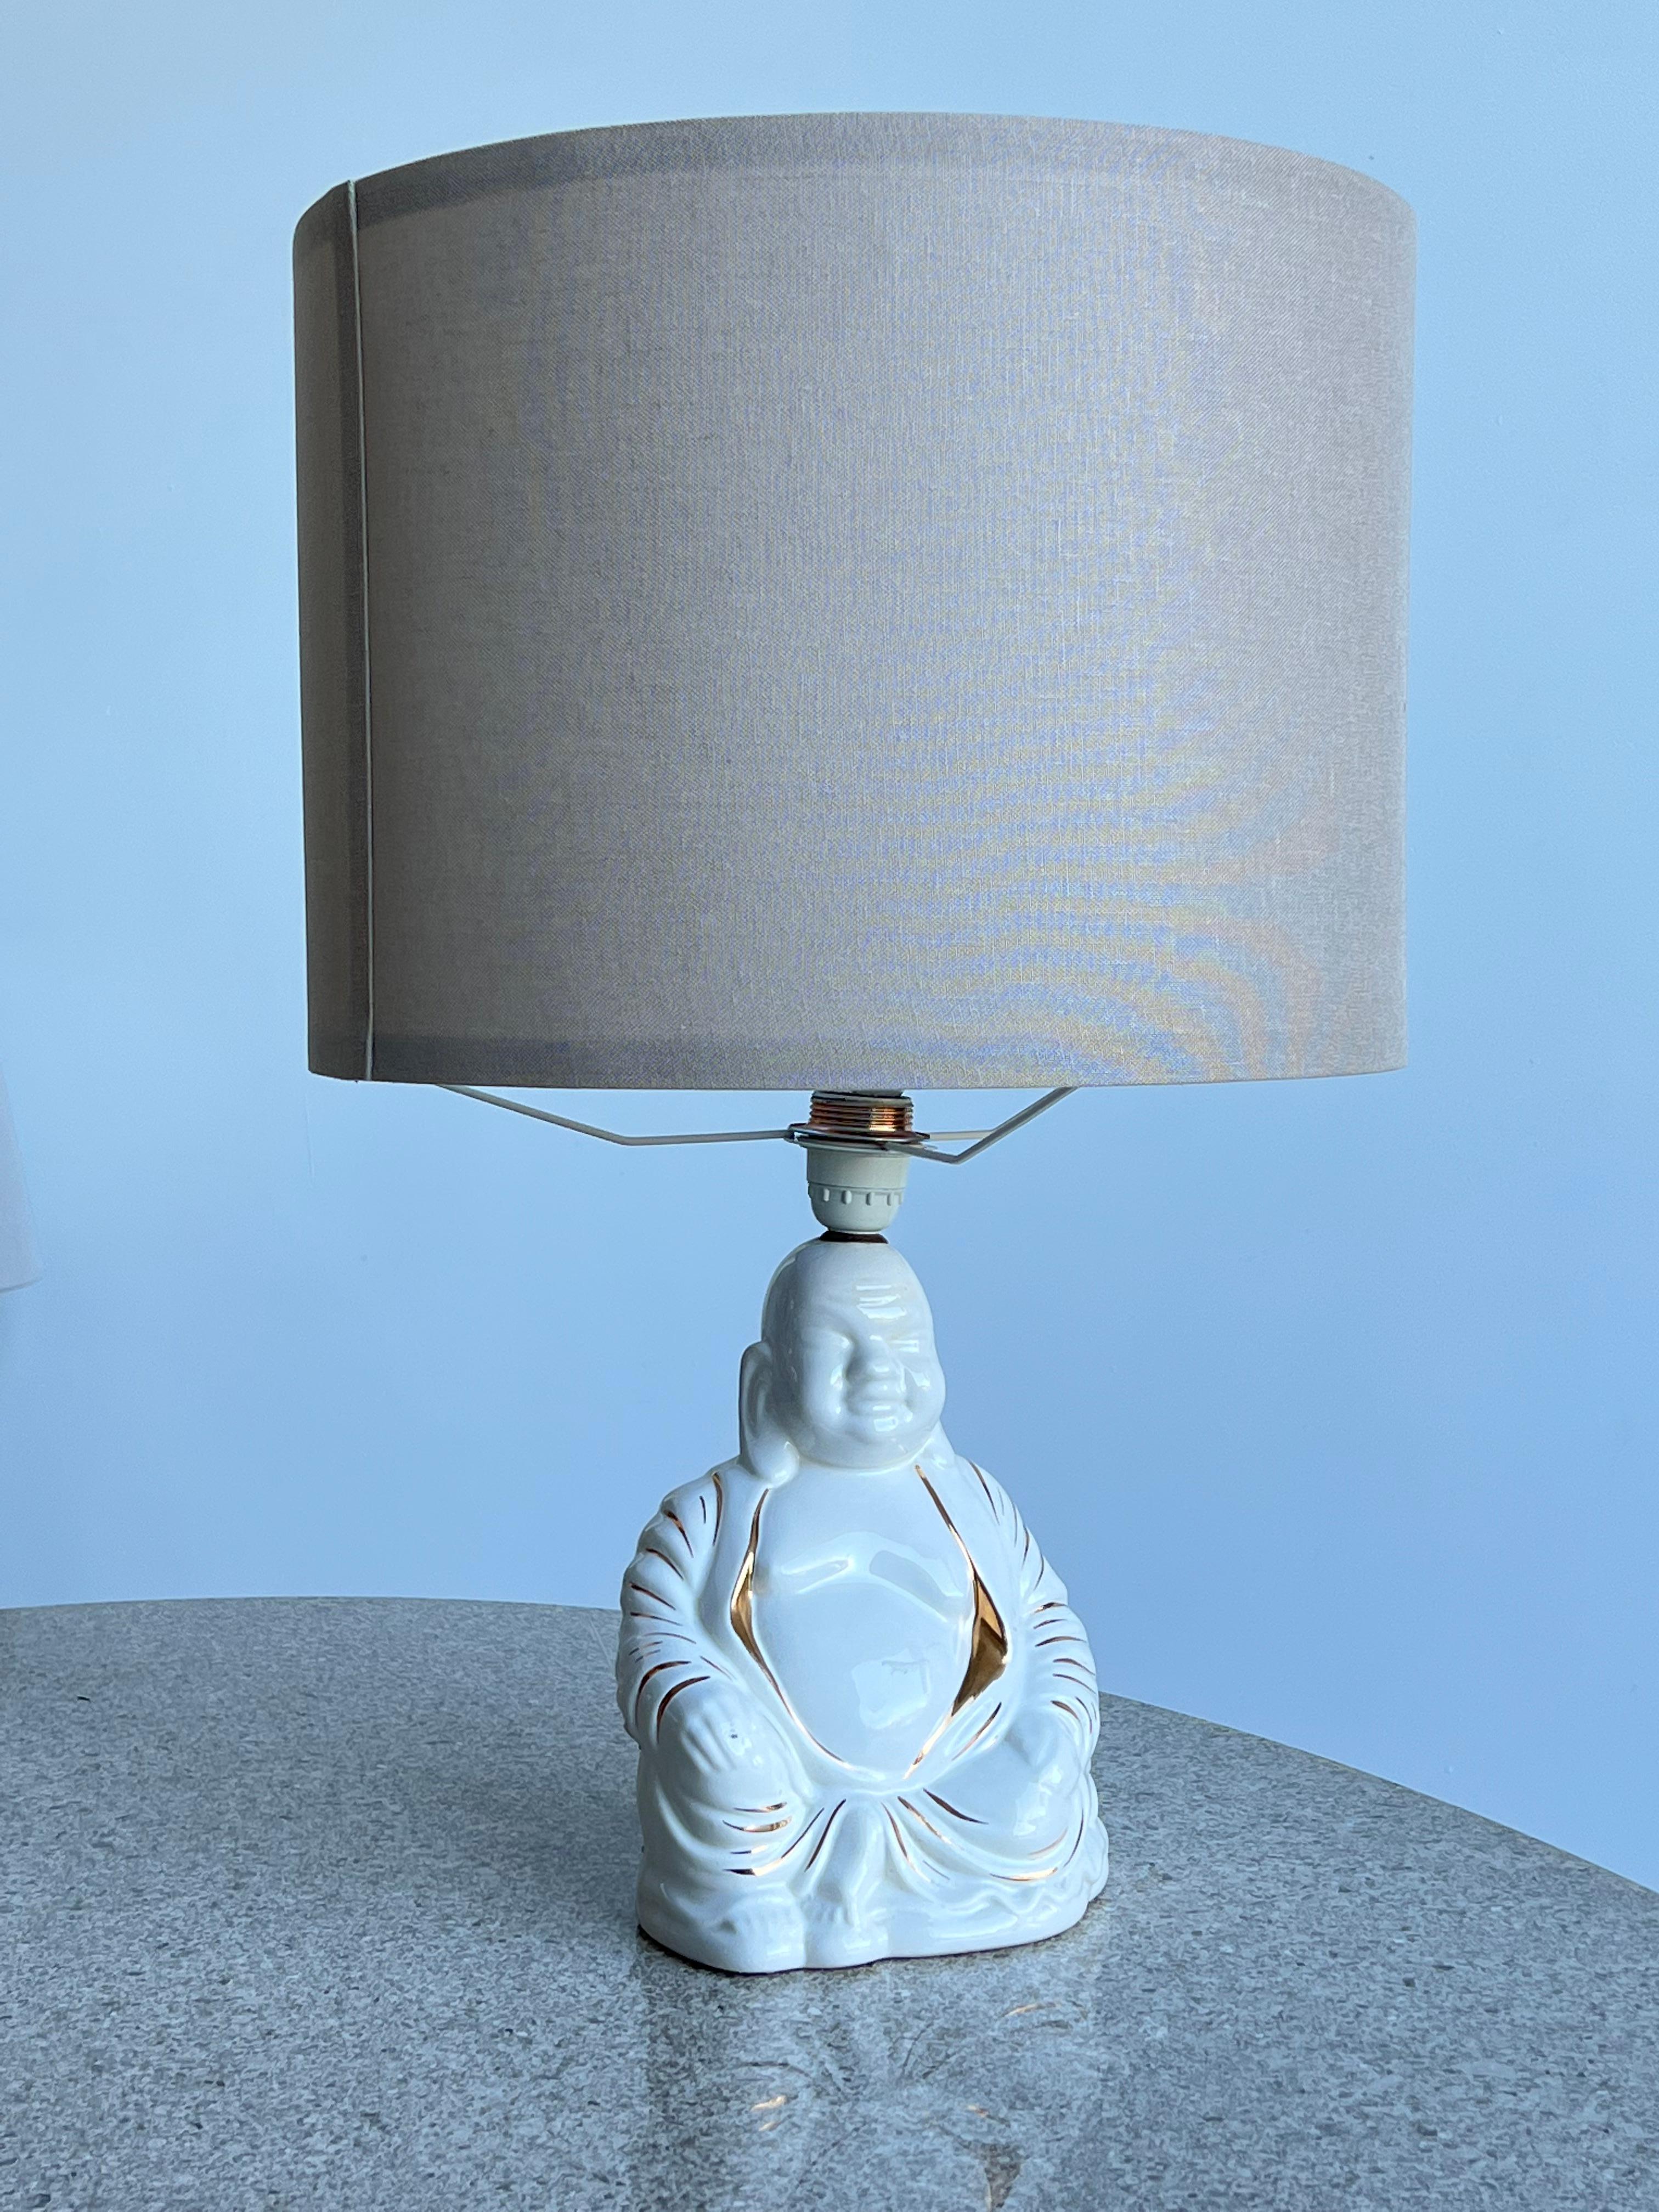 Italian mid century hand painted porcelain table lamp, Buddha shaped 1960s.
Gold hand paint porcelain Buddha lamp, the shade is been replaced with a light colour round shaped shade.
Completely rewired with nice gold cables and switch.